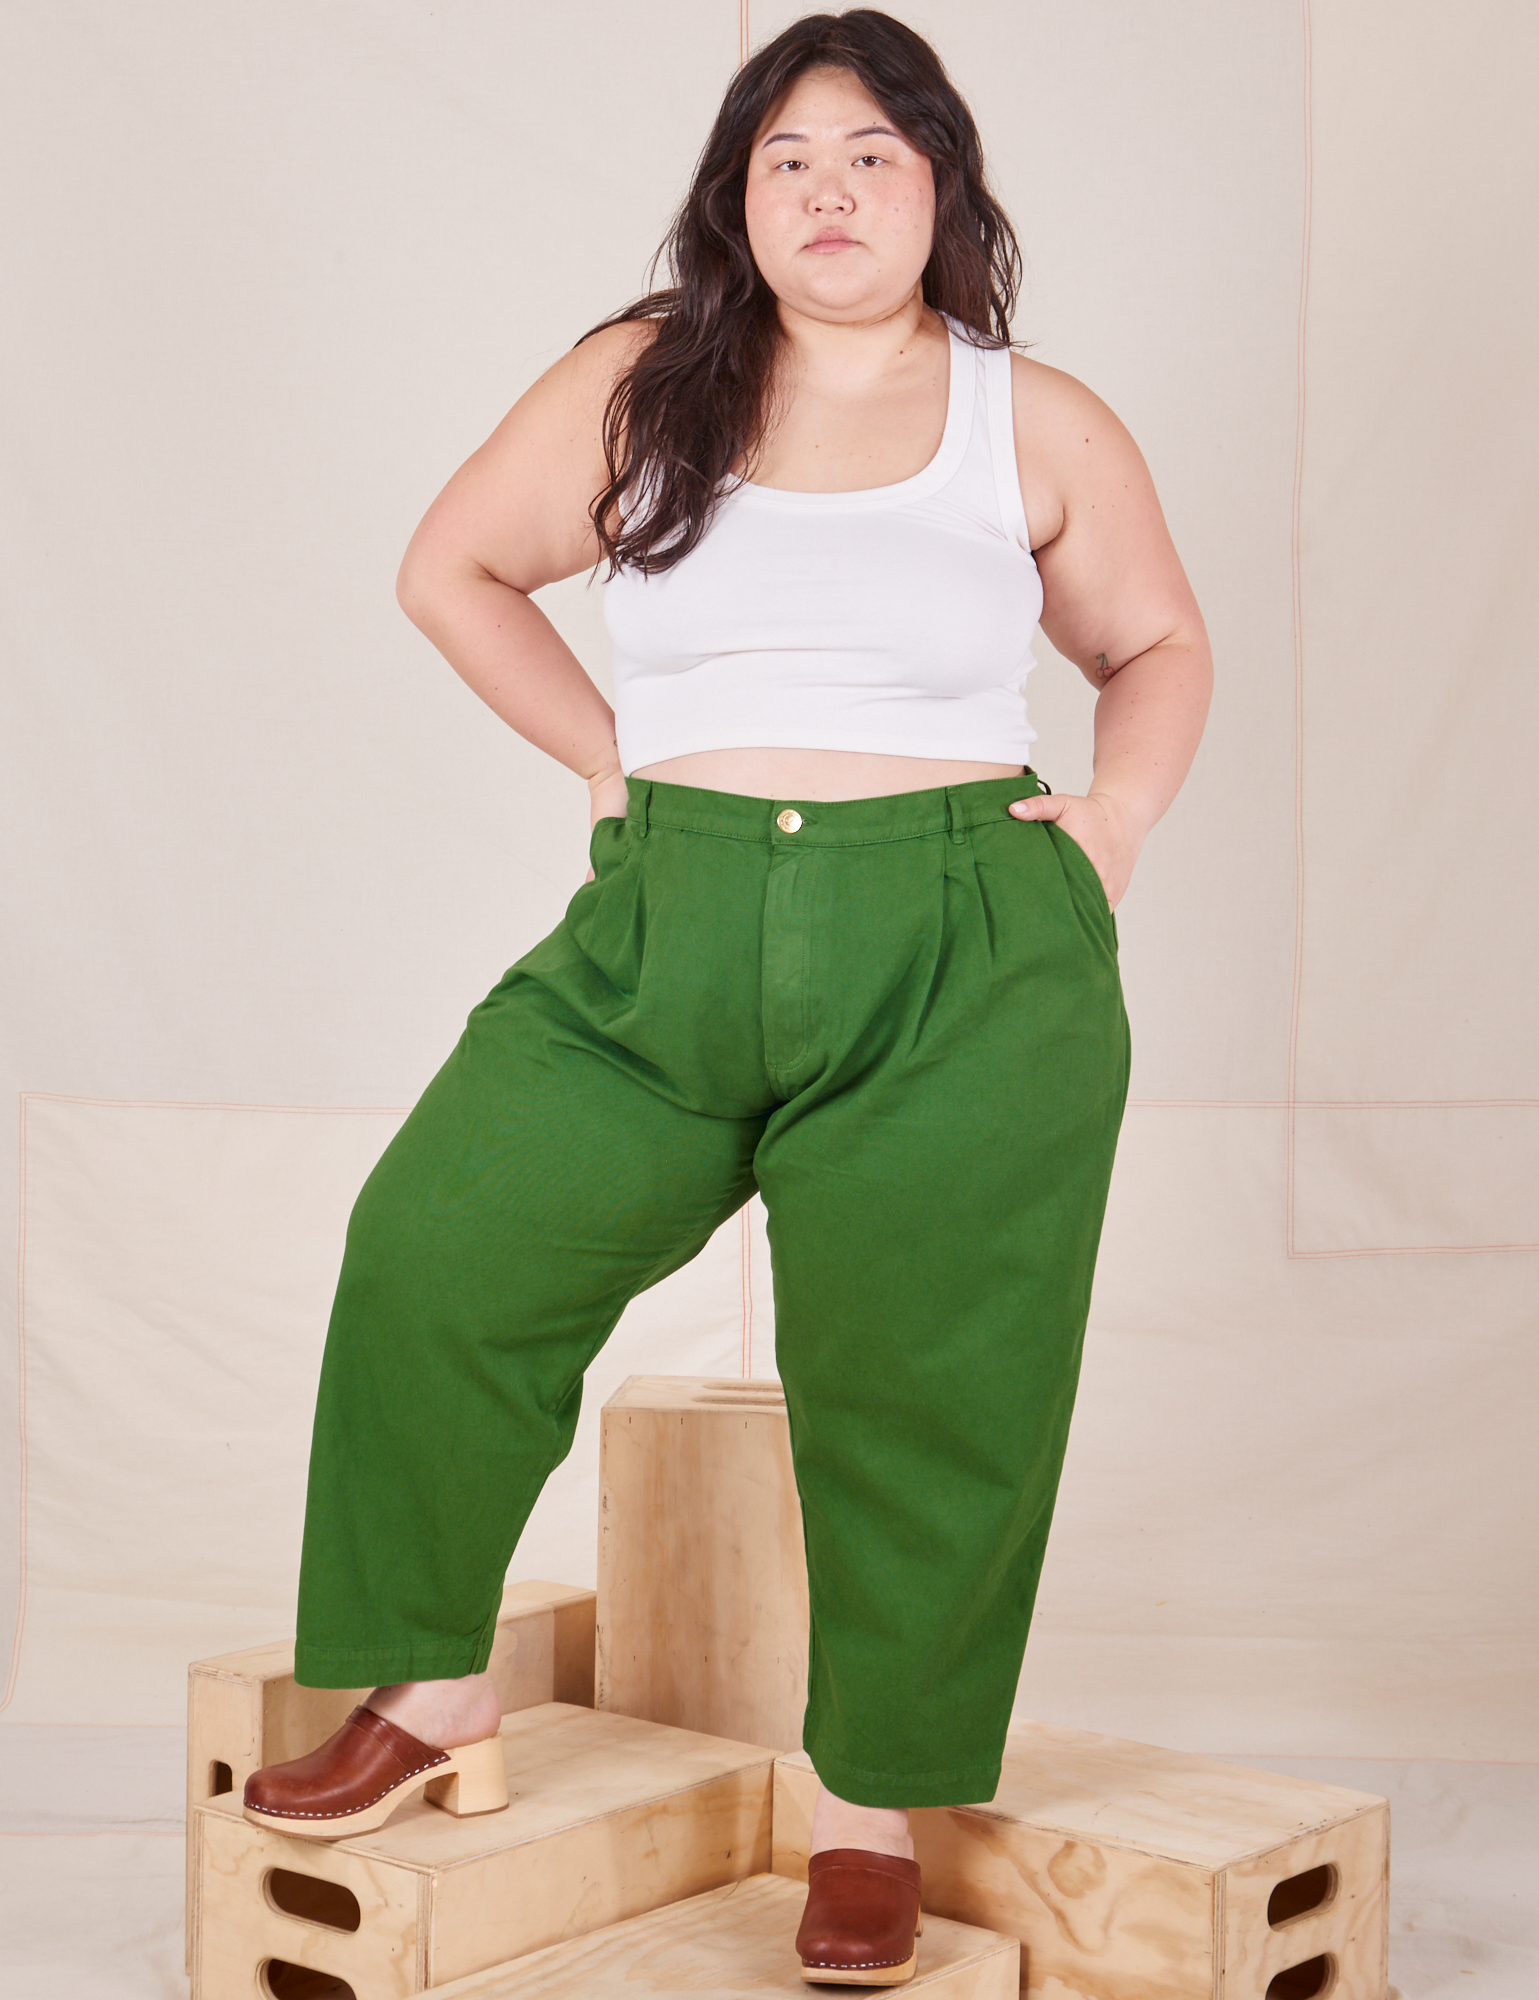 Ashley is 5&#39;7&quot; and wearing 1XL Petite Heavyweight Trousers in Lawn Green paired with Cropped Tank Top in vintage tee off-white